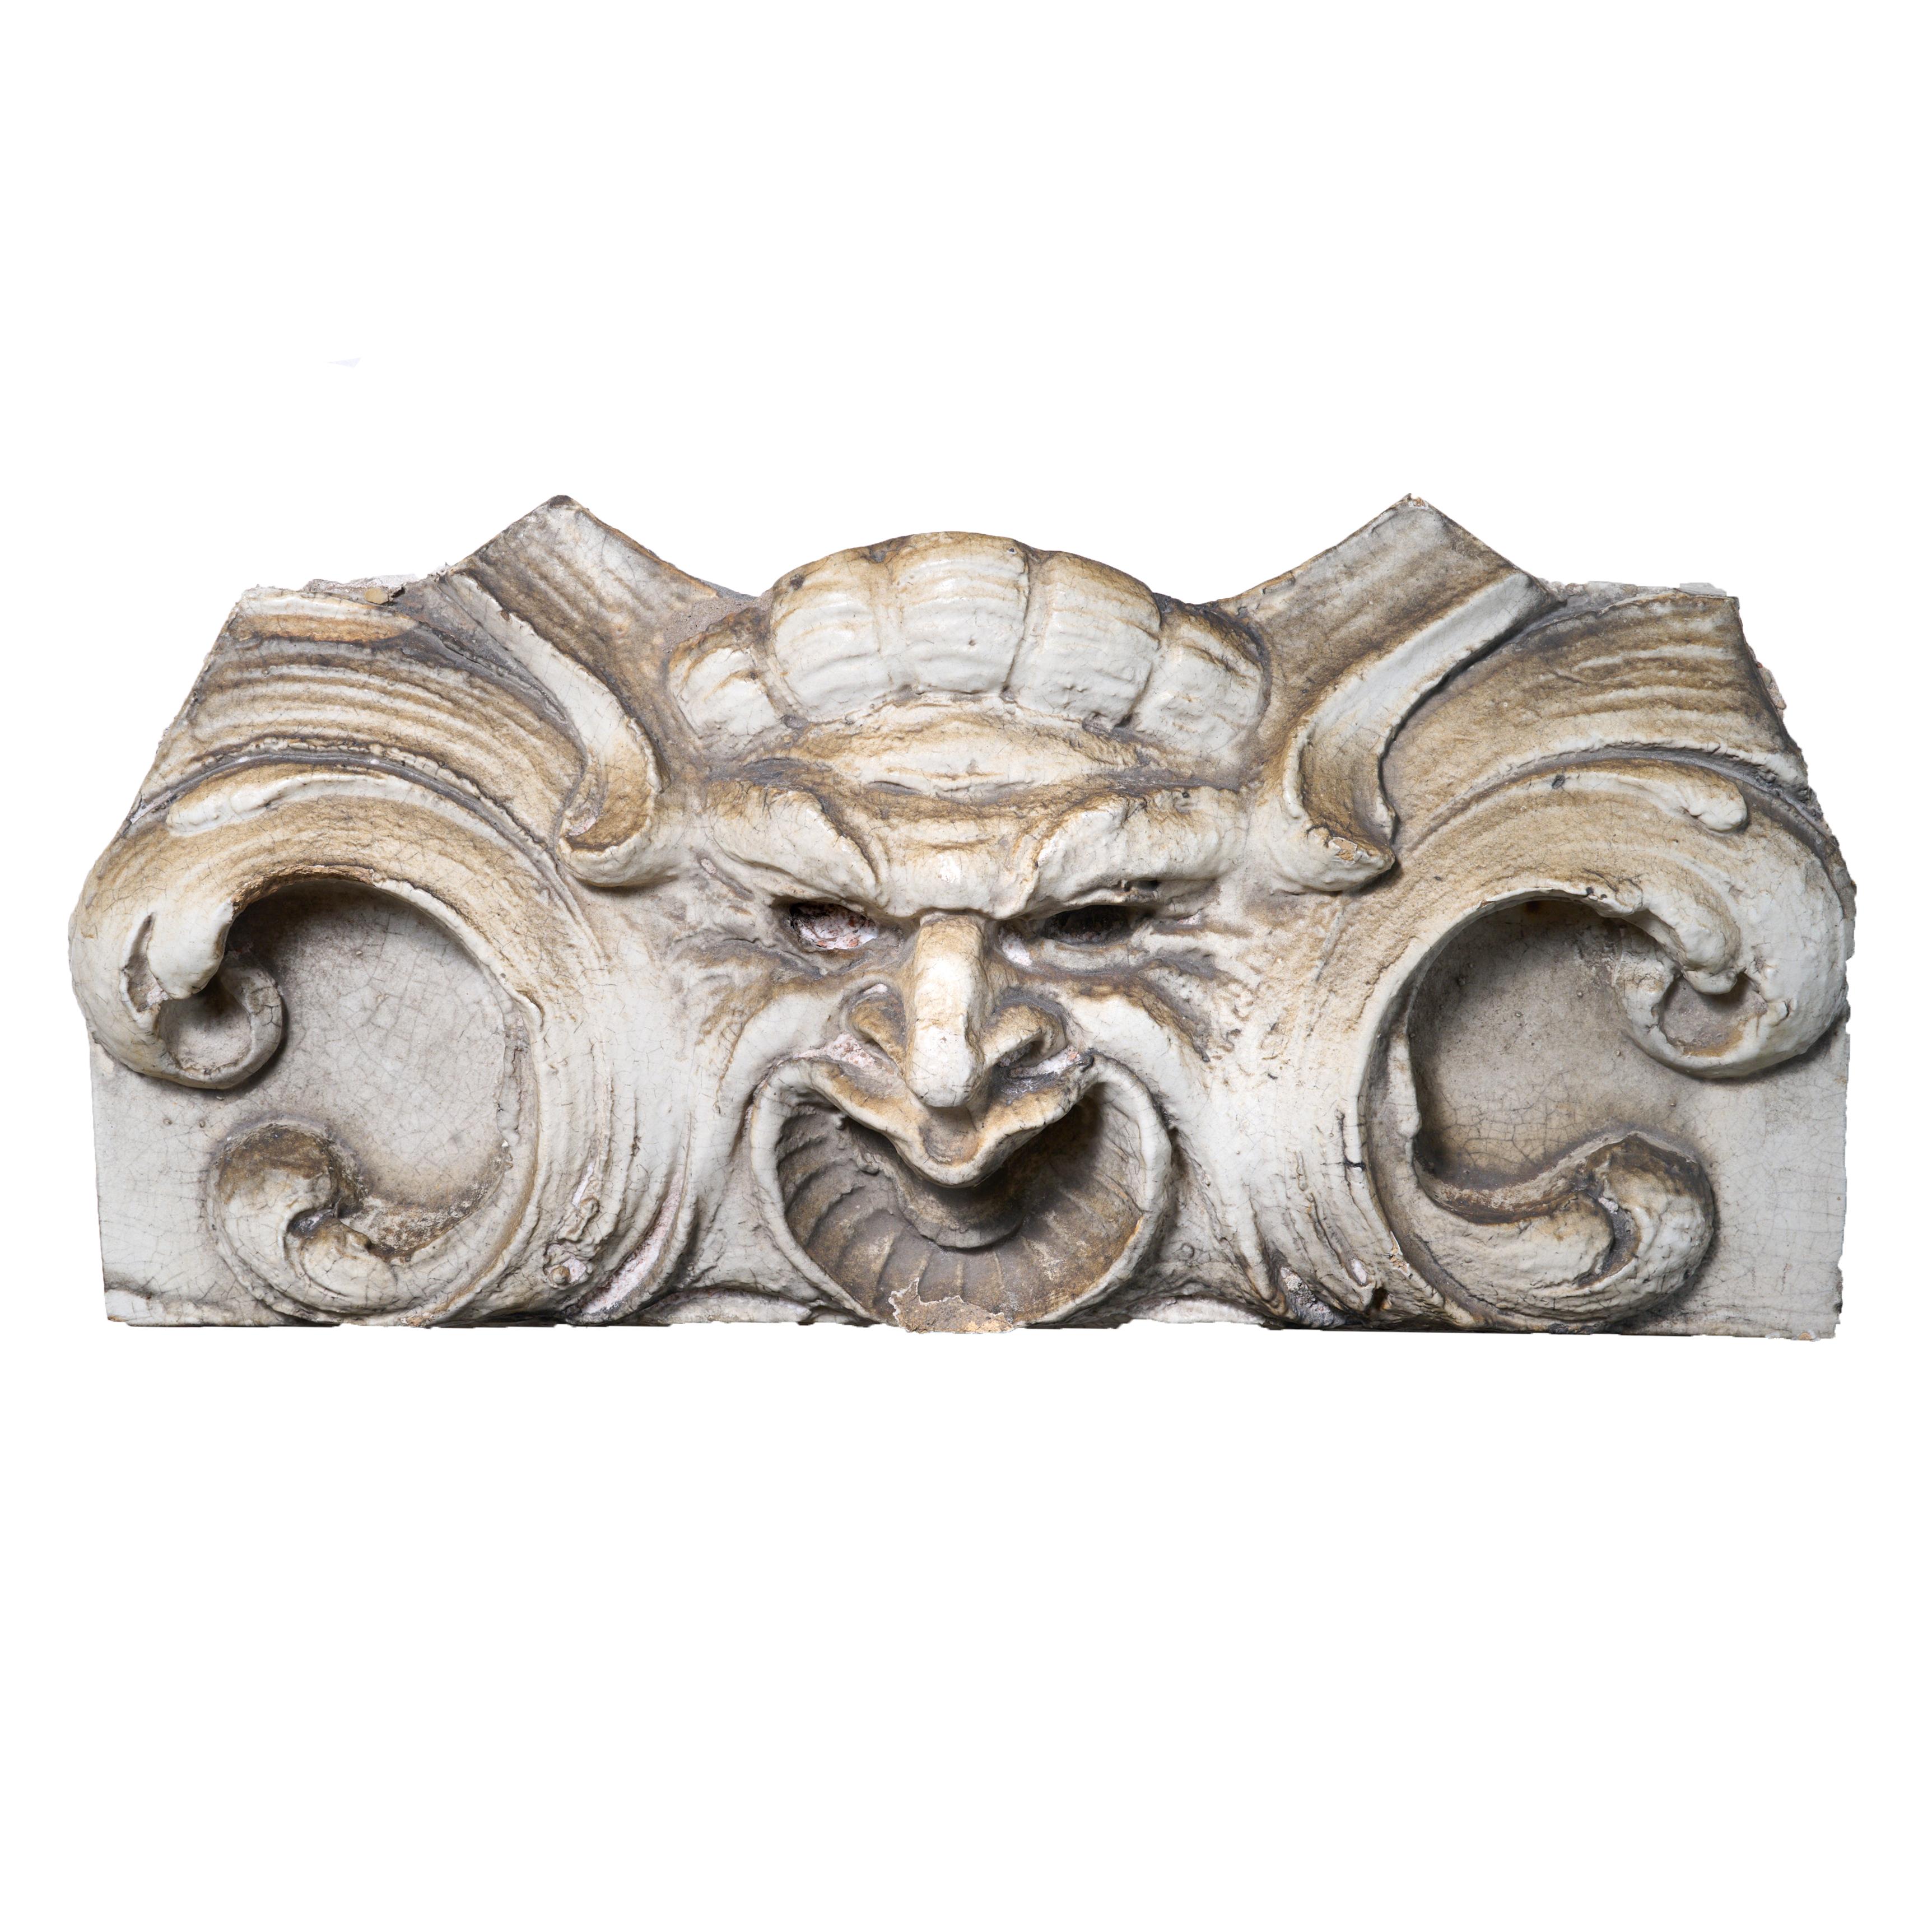 Terra cotta mascaron from a building facade with newly made custom wall mount.

